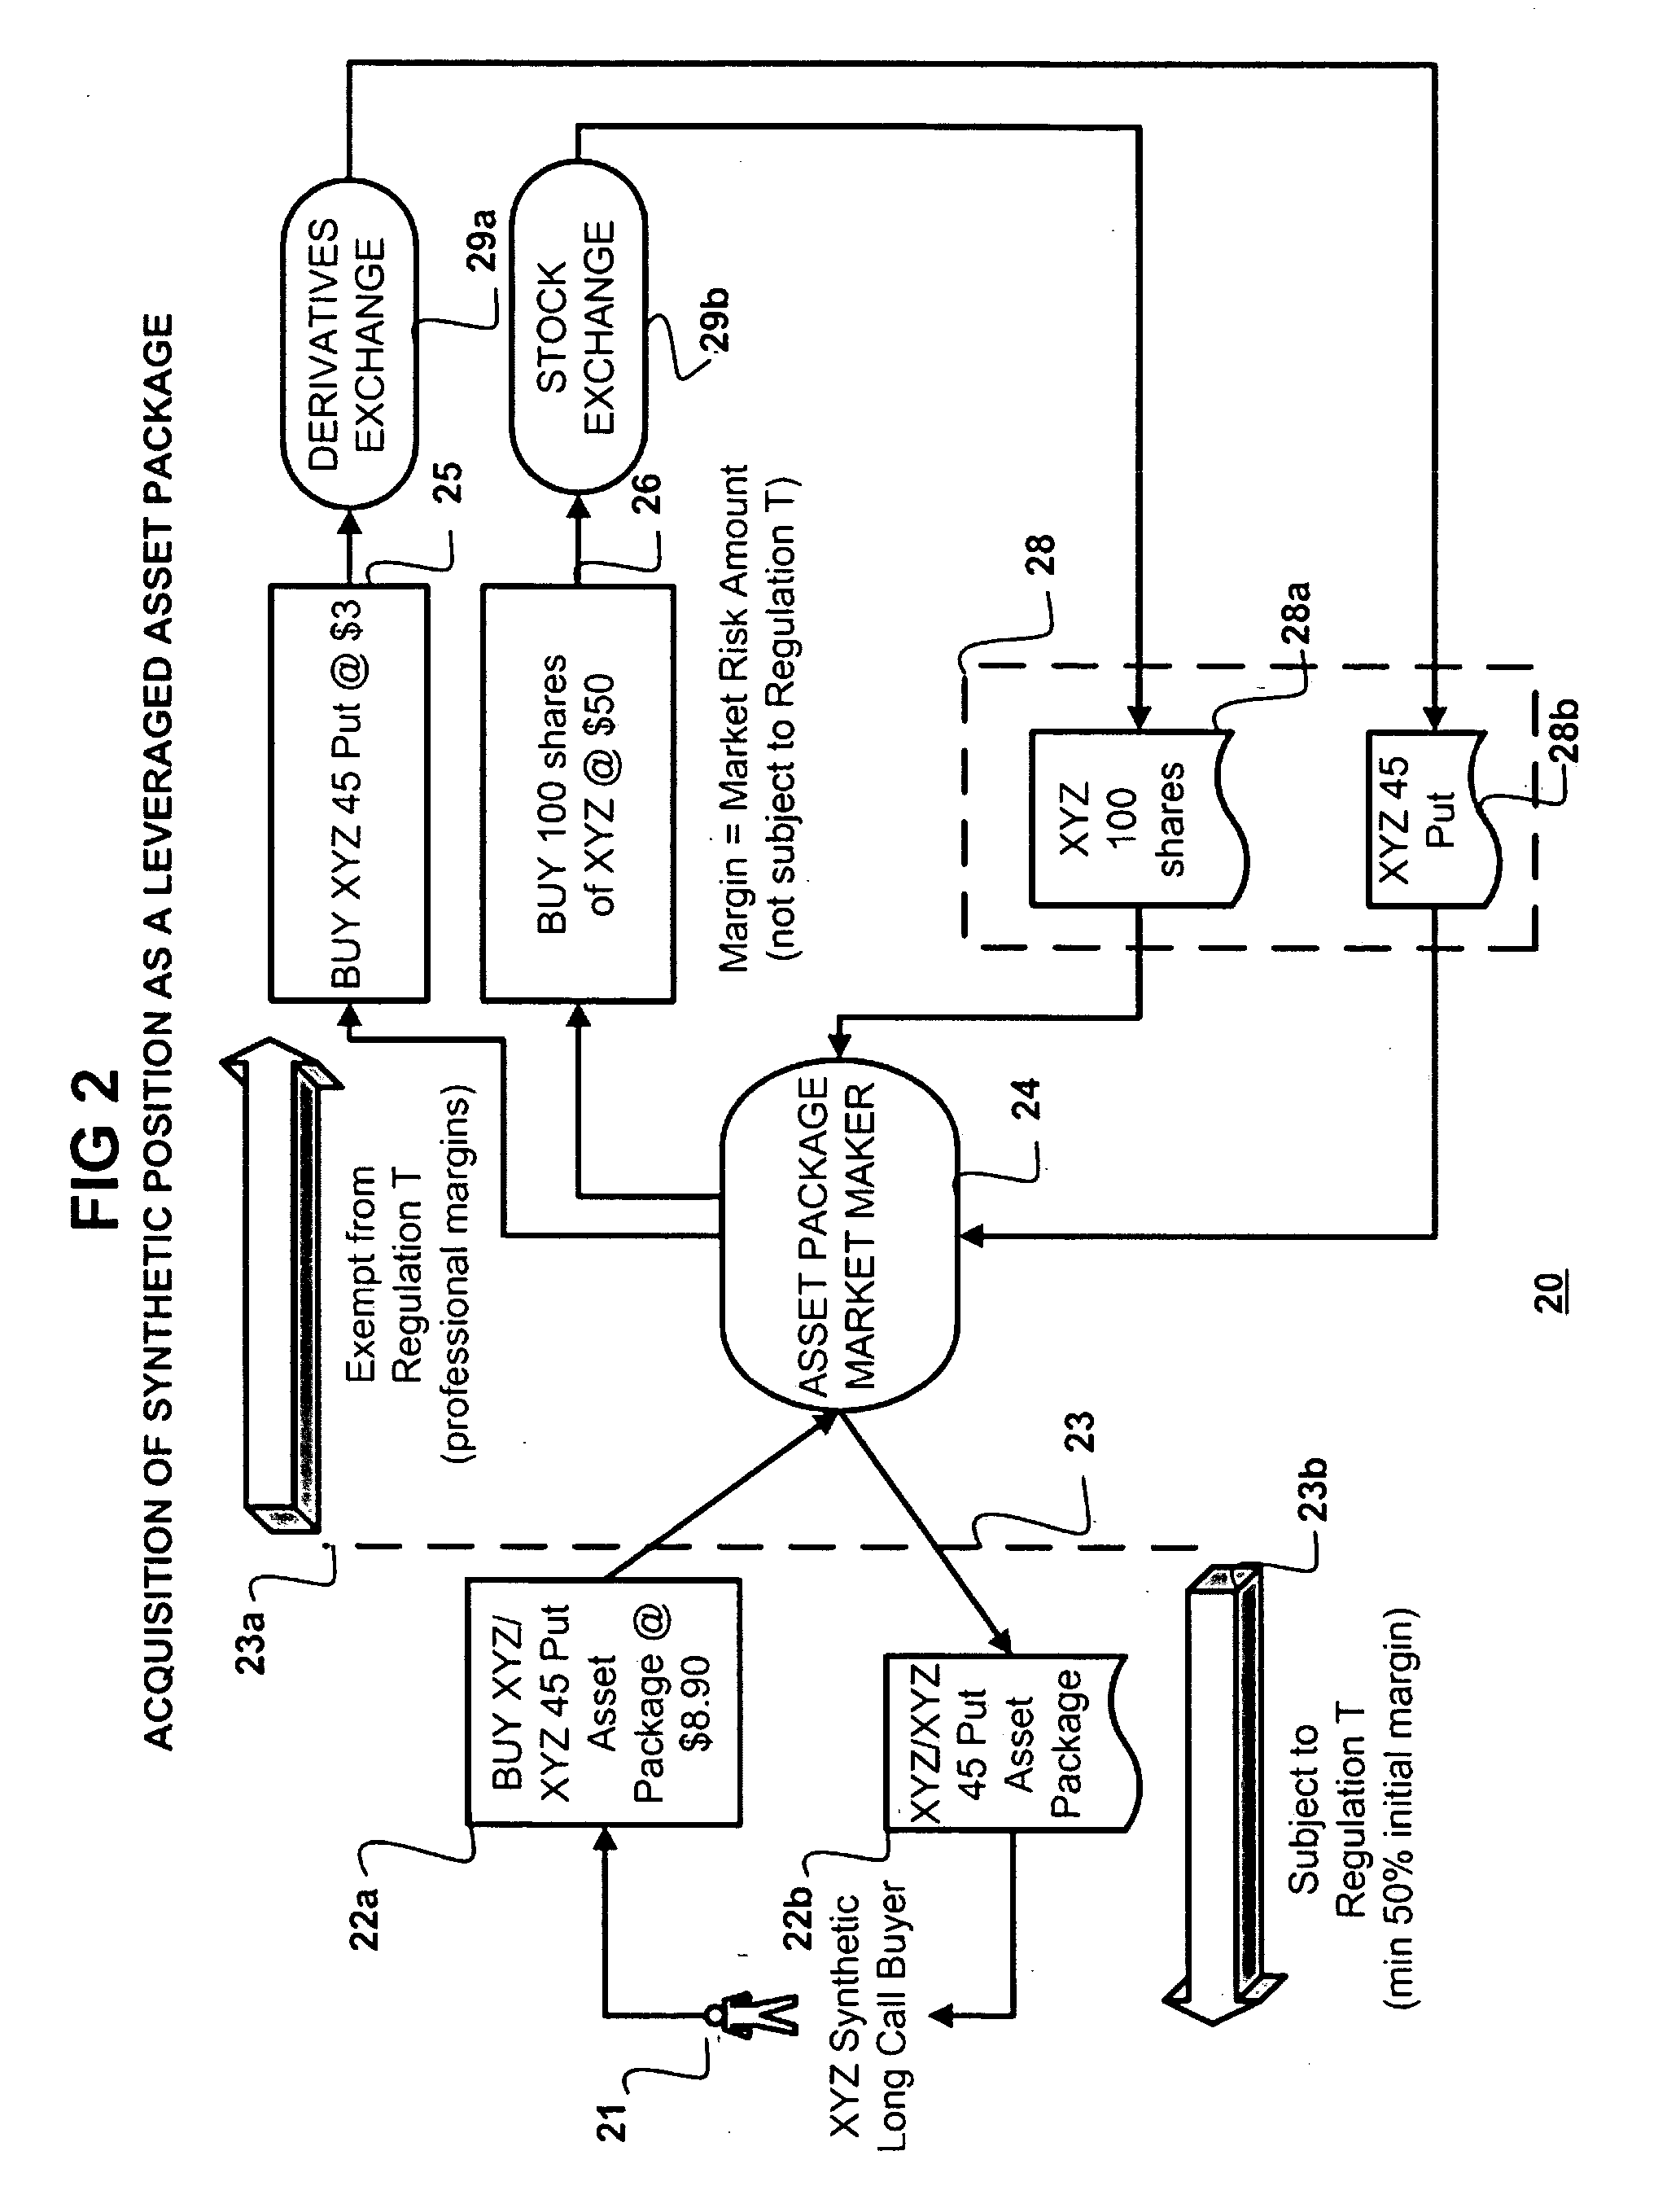 Automated method and system for market making, centralized margin facility and clearing of synthetic orders